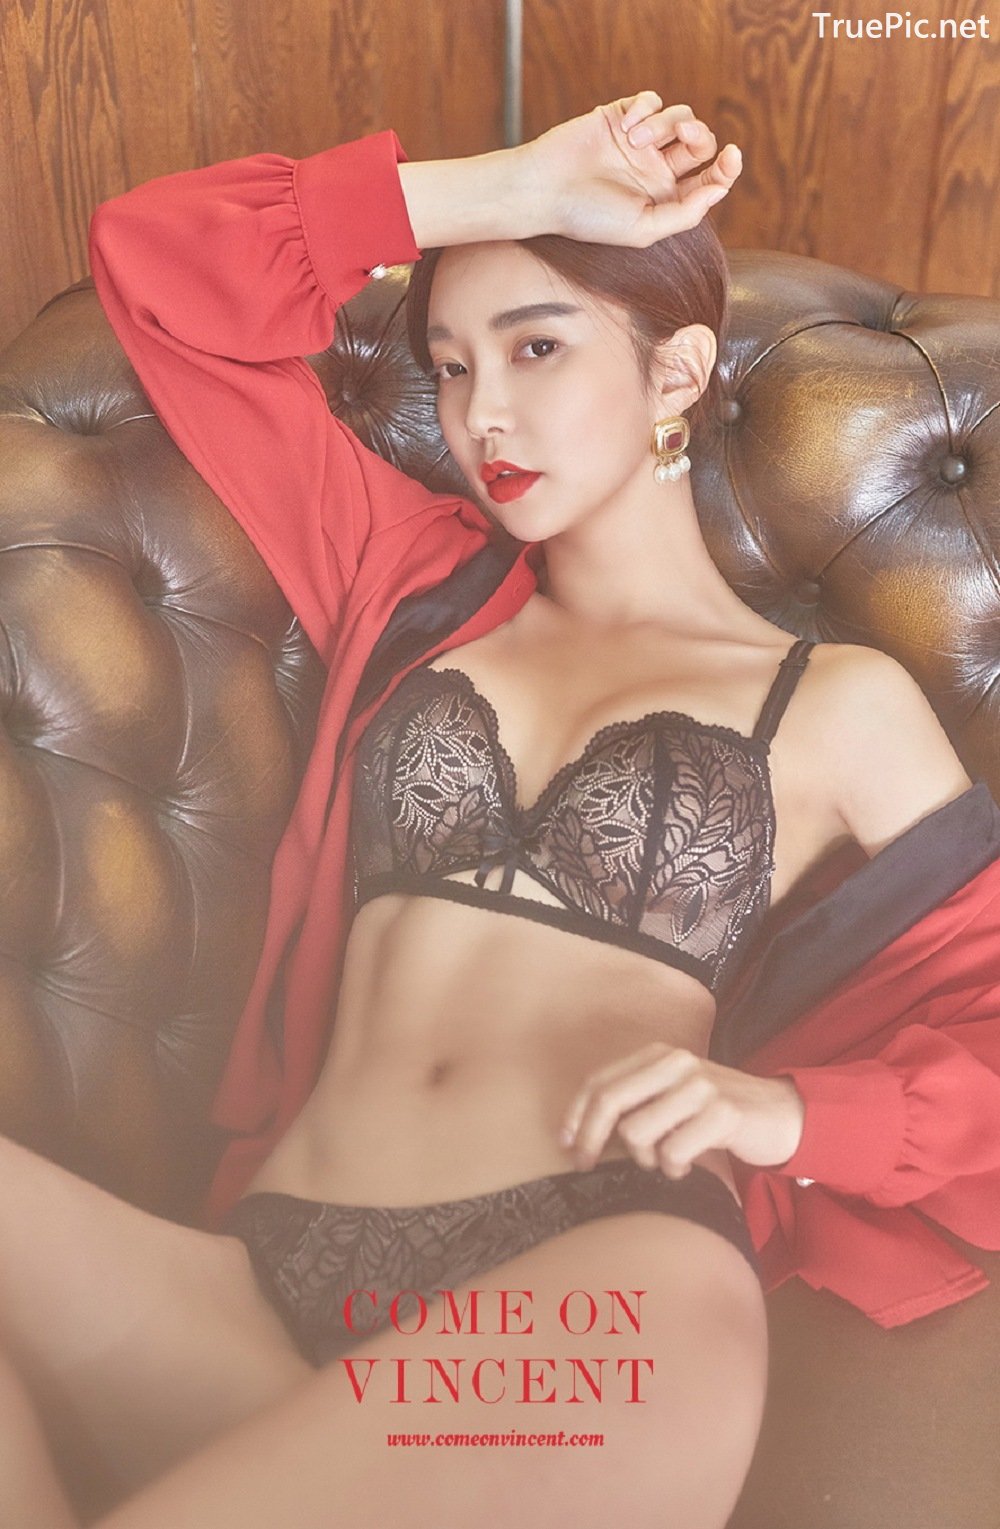 Image-Park-Soo-Yeon-Black-Red-and-White-Lingerie-Korean-Model-Fashion-TruePic.net- Picture-31